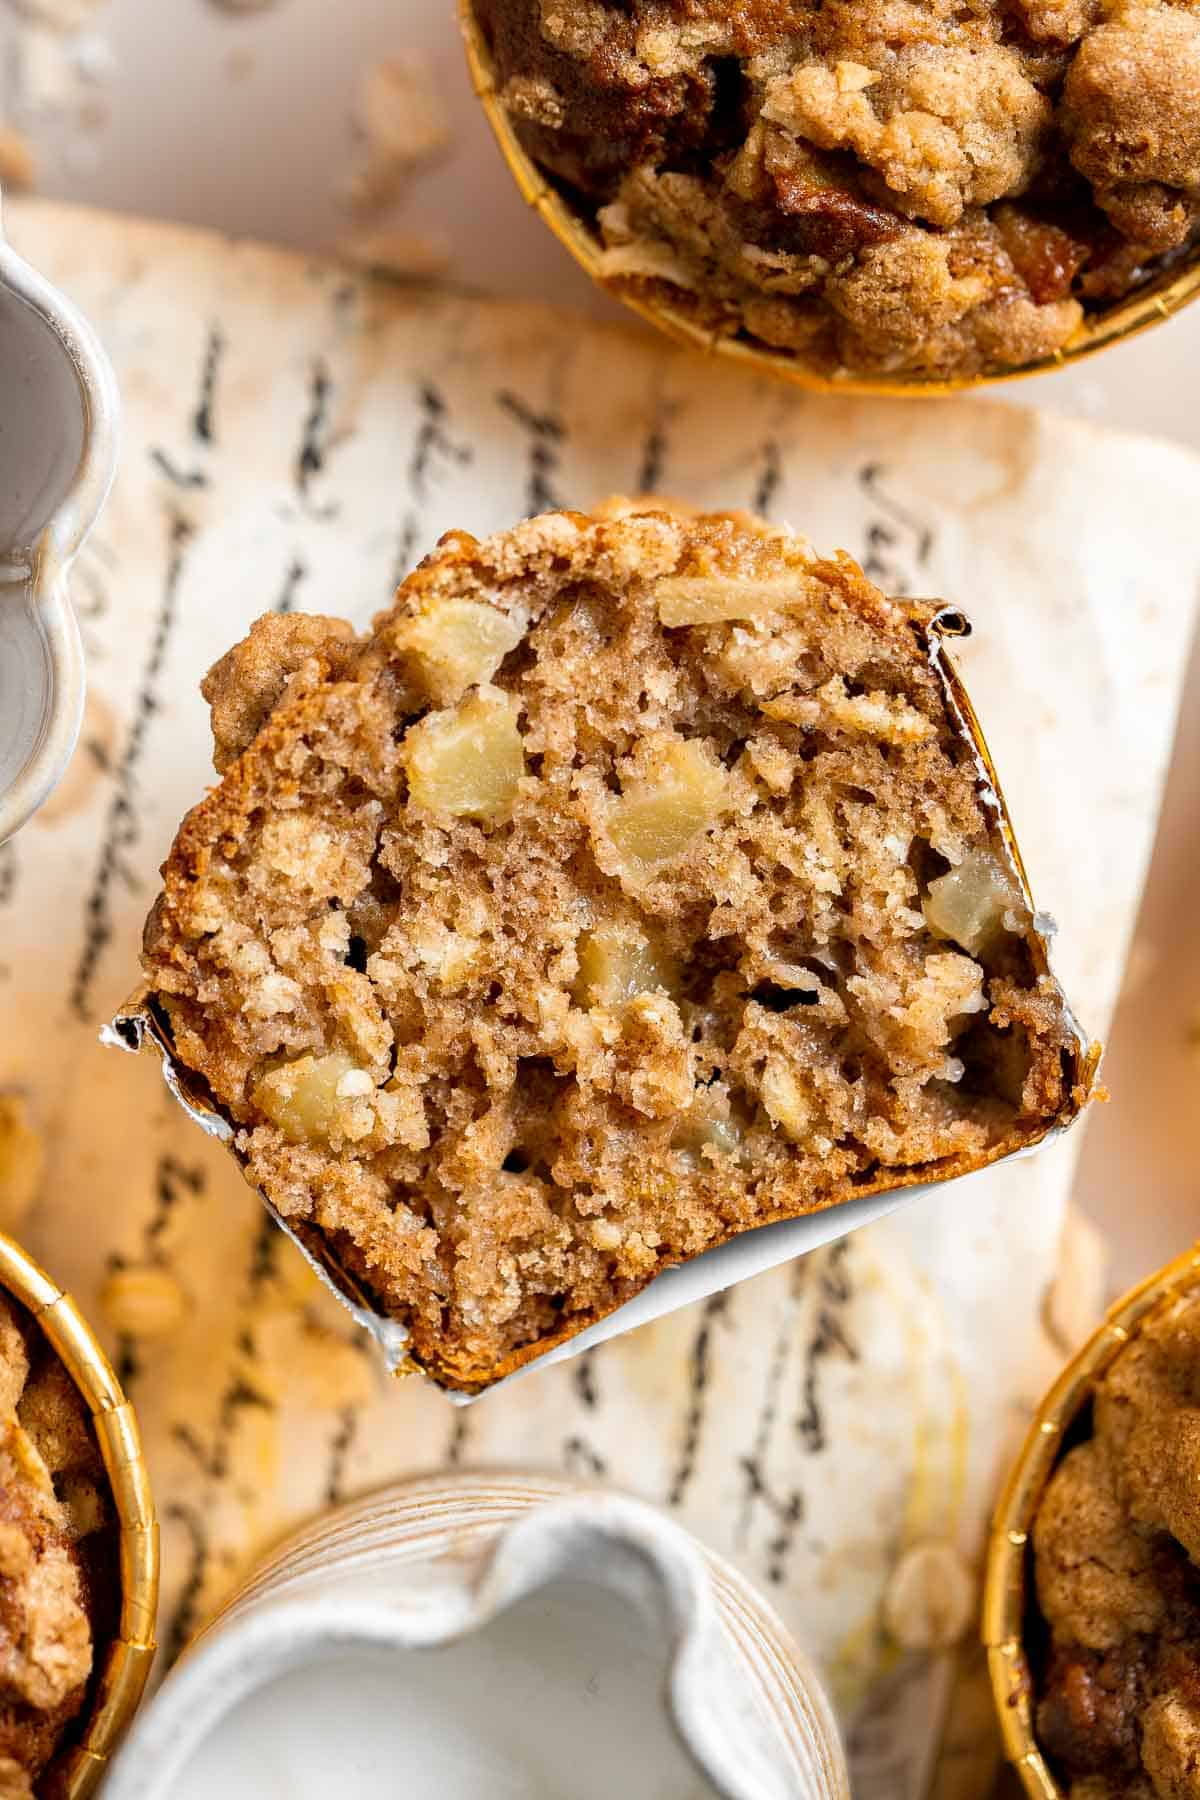 Cinnamon Apple Oatmeal Muffins are fast, easy and delicious— loaded with apples, oats, and fall spices. A quick nutritious bite for breakfast or snack time. | aheadofthyme.com